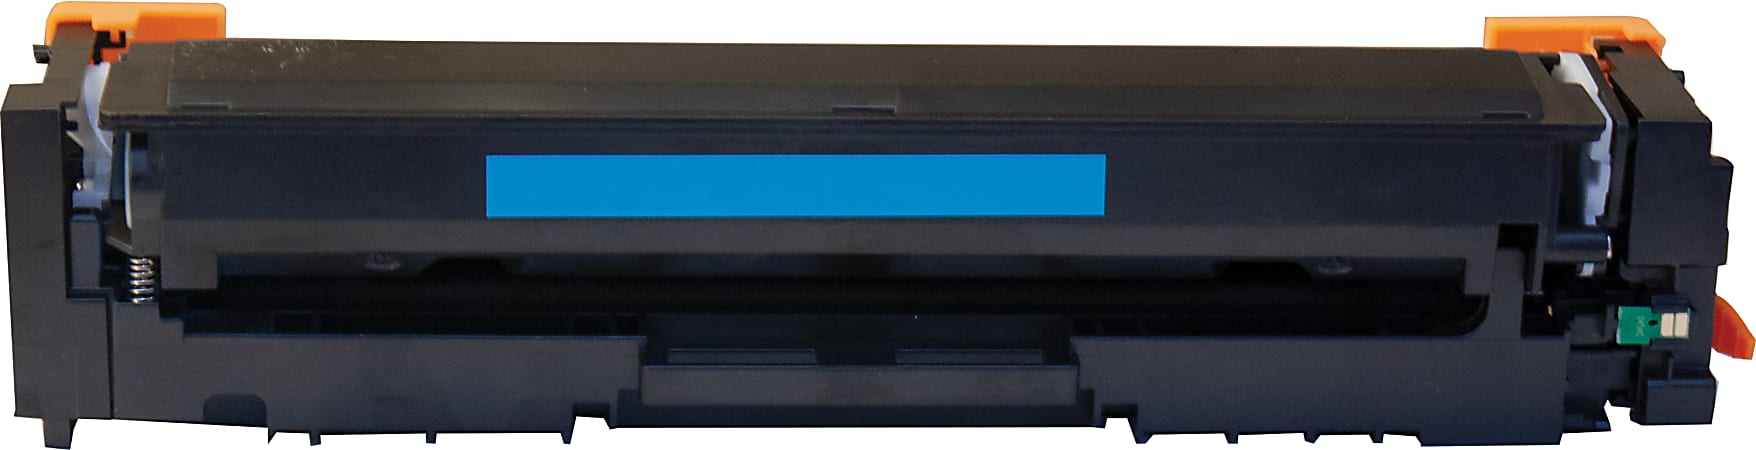 M&A Global Remanufactured High-Yield Cyan Toner Cartridge Replacement For HP 201X, CF401X